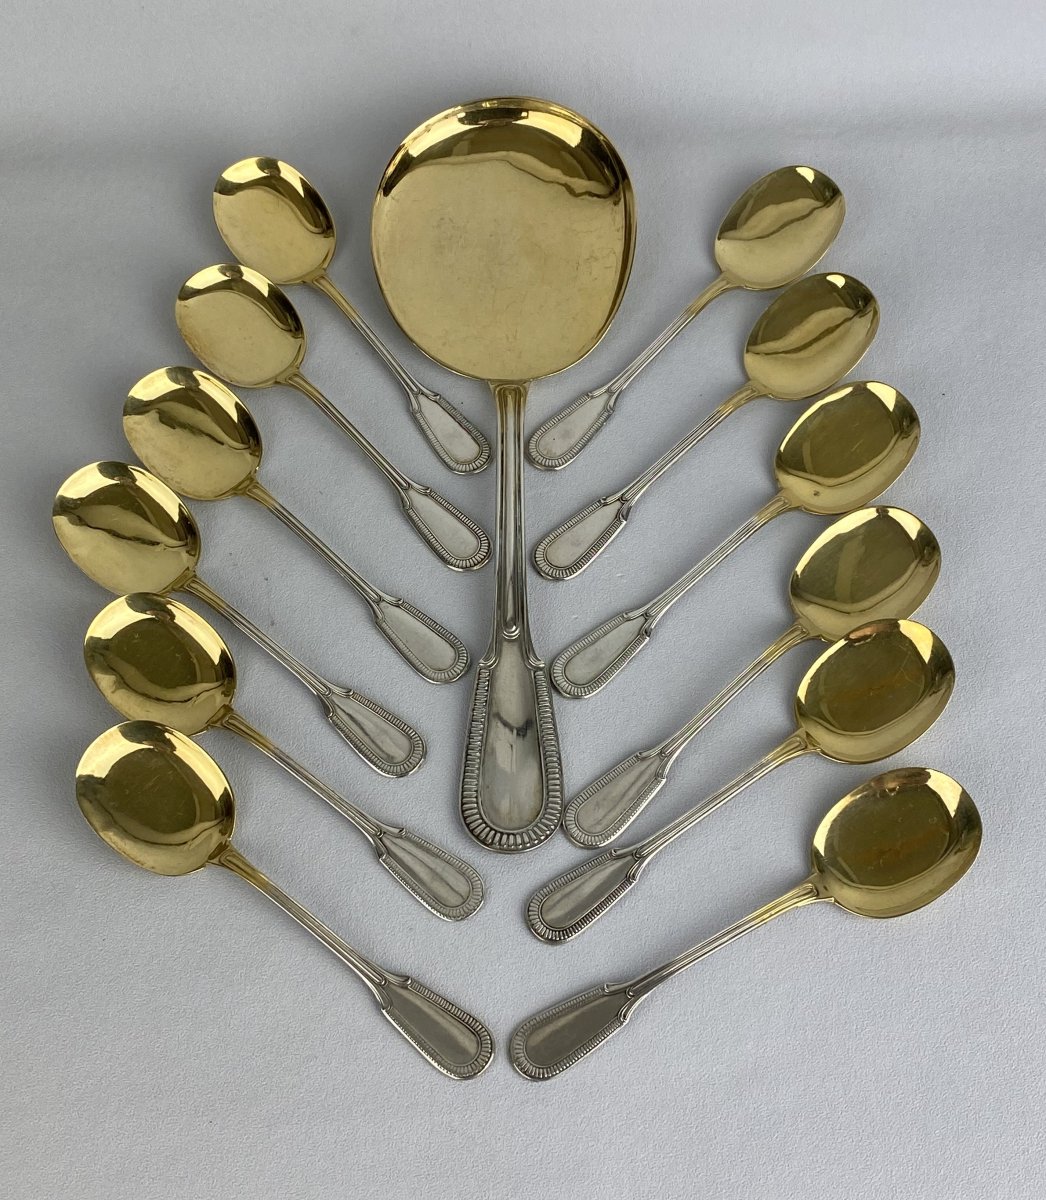 Ice Cream Service In Sterling Silver / Vermeil Of 13 Pieces Weight 320 Grs